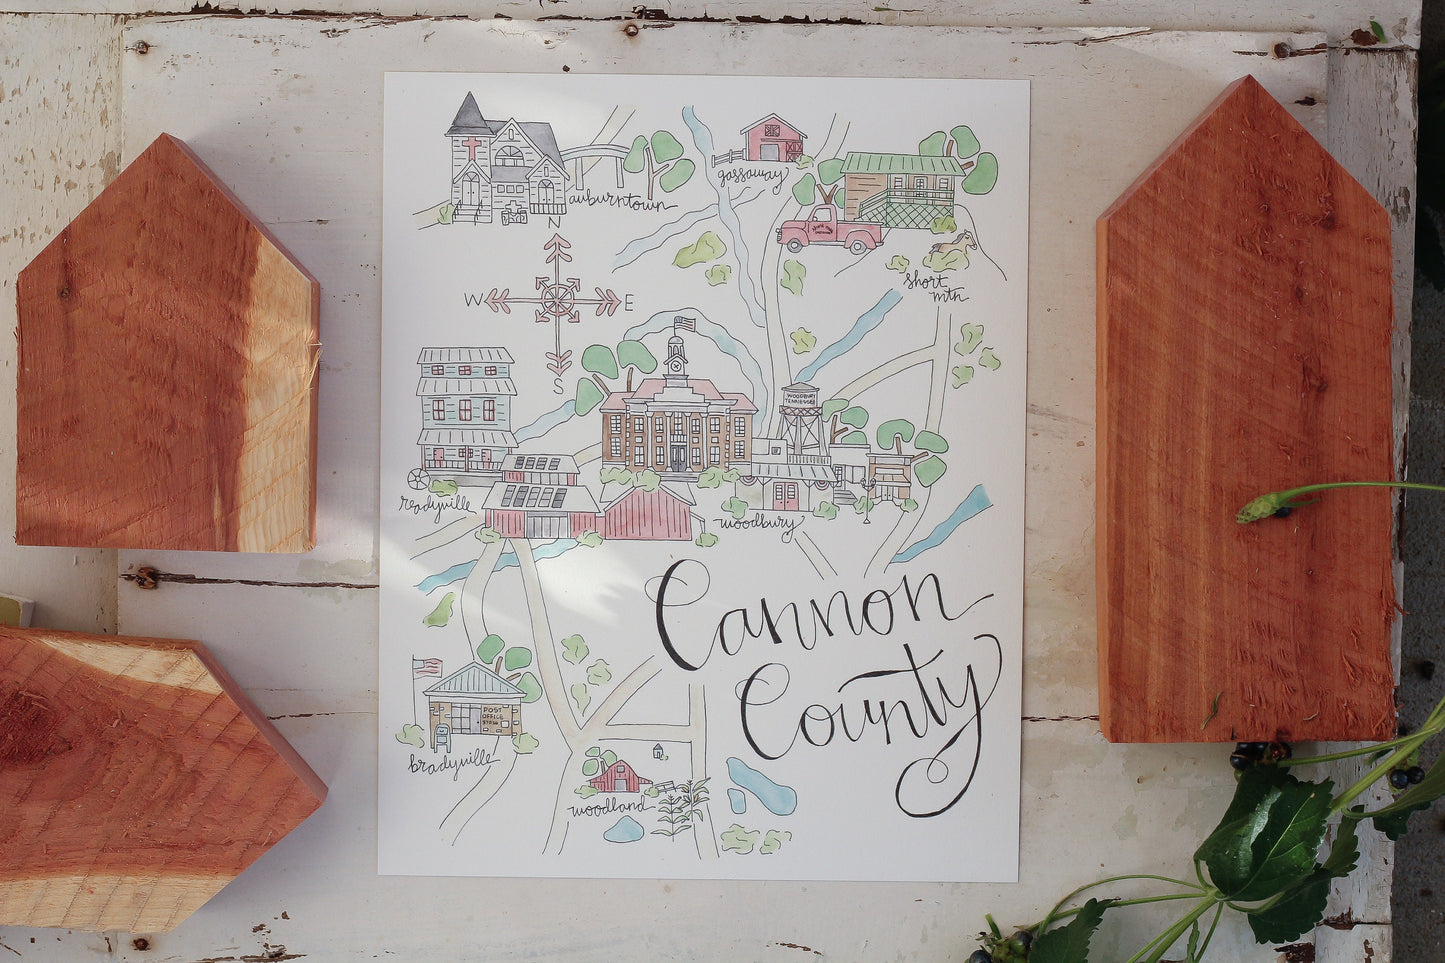 Cannon County, Tennessee Art Print